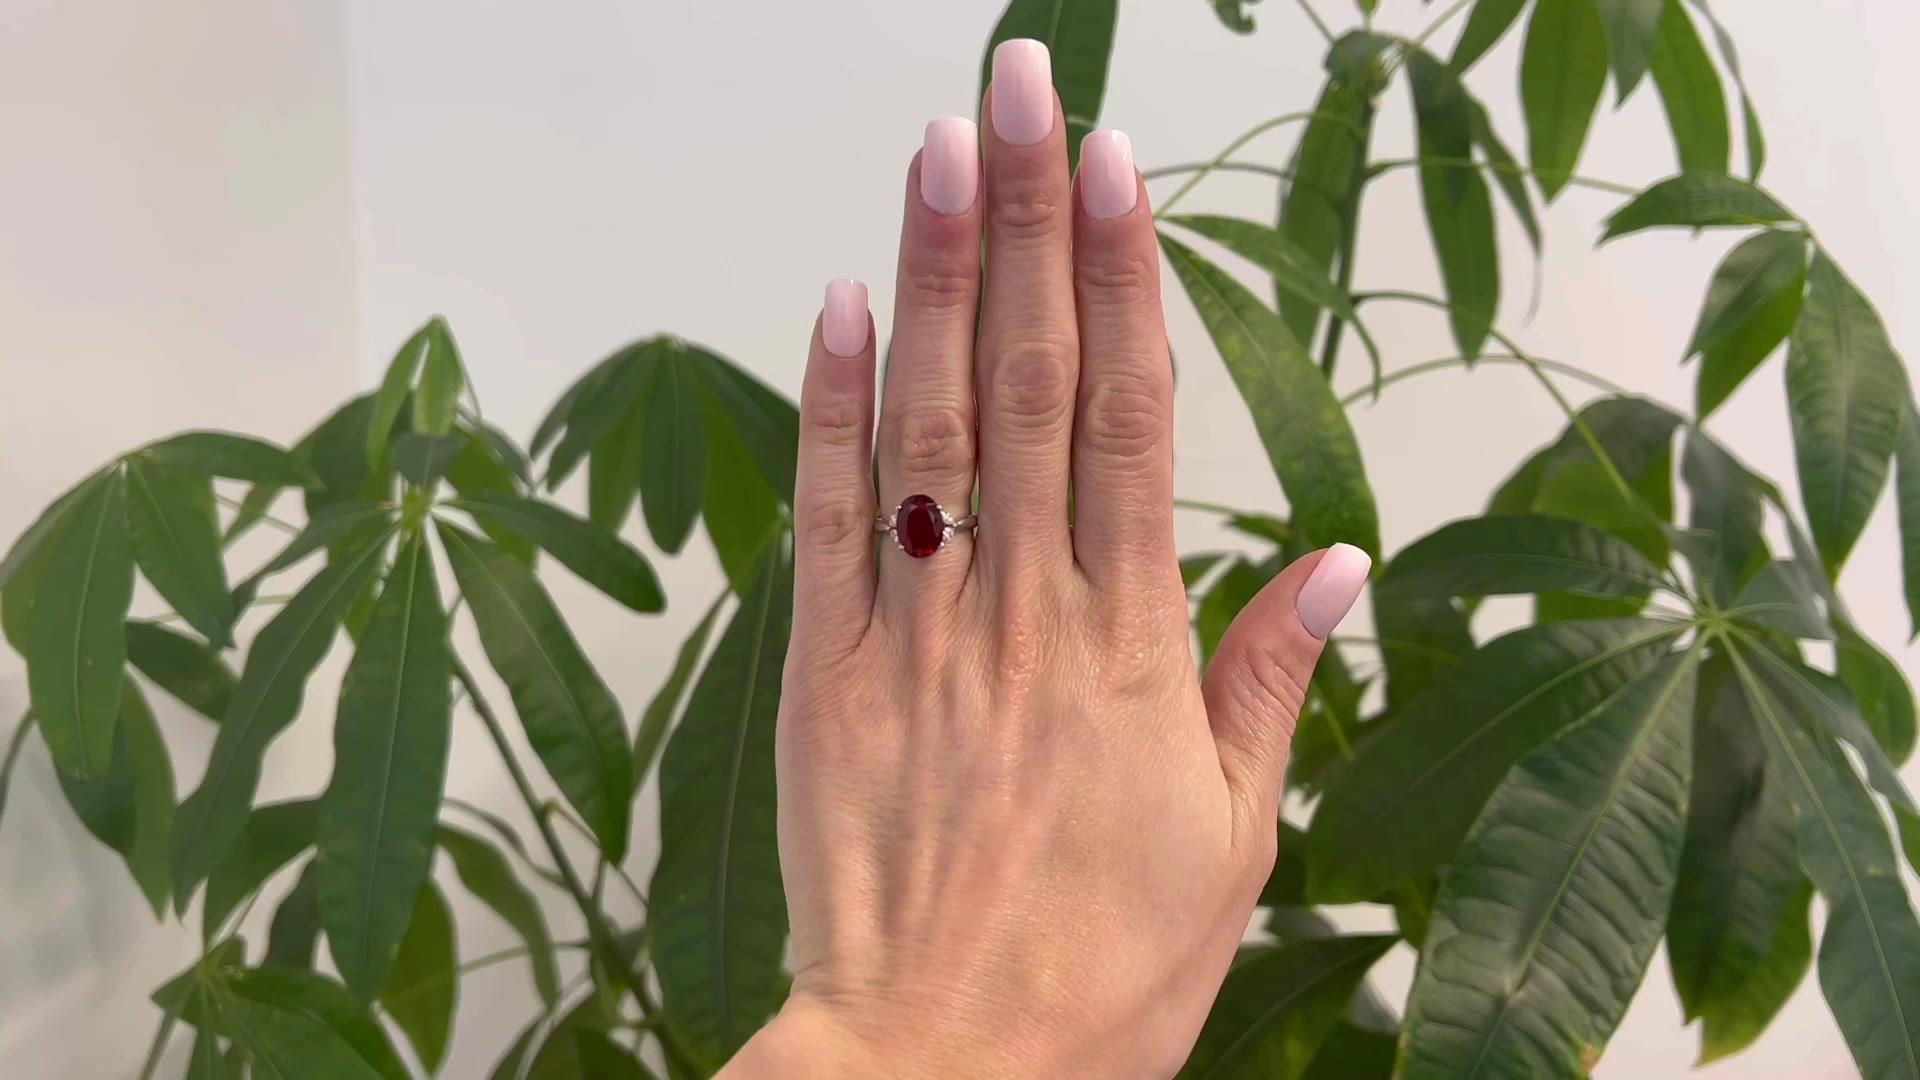 One Vintage 3.55 Carats Red Spinel Diamond Platinum Ring. Featuring one oval mixed cut spinel of 3.55 carats. Accented by four marquise cut diamonds with a total weight of 0.23 carat, graded I color, SI clarity. Crafted in platinum with purity marks